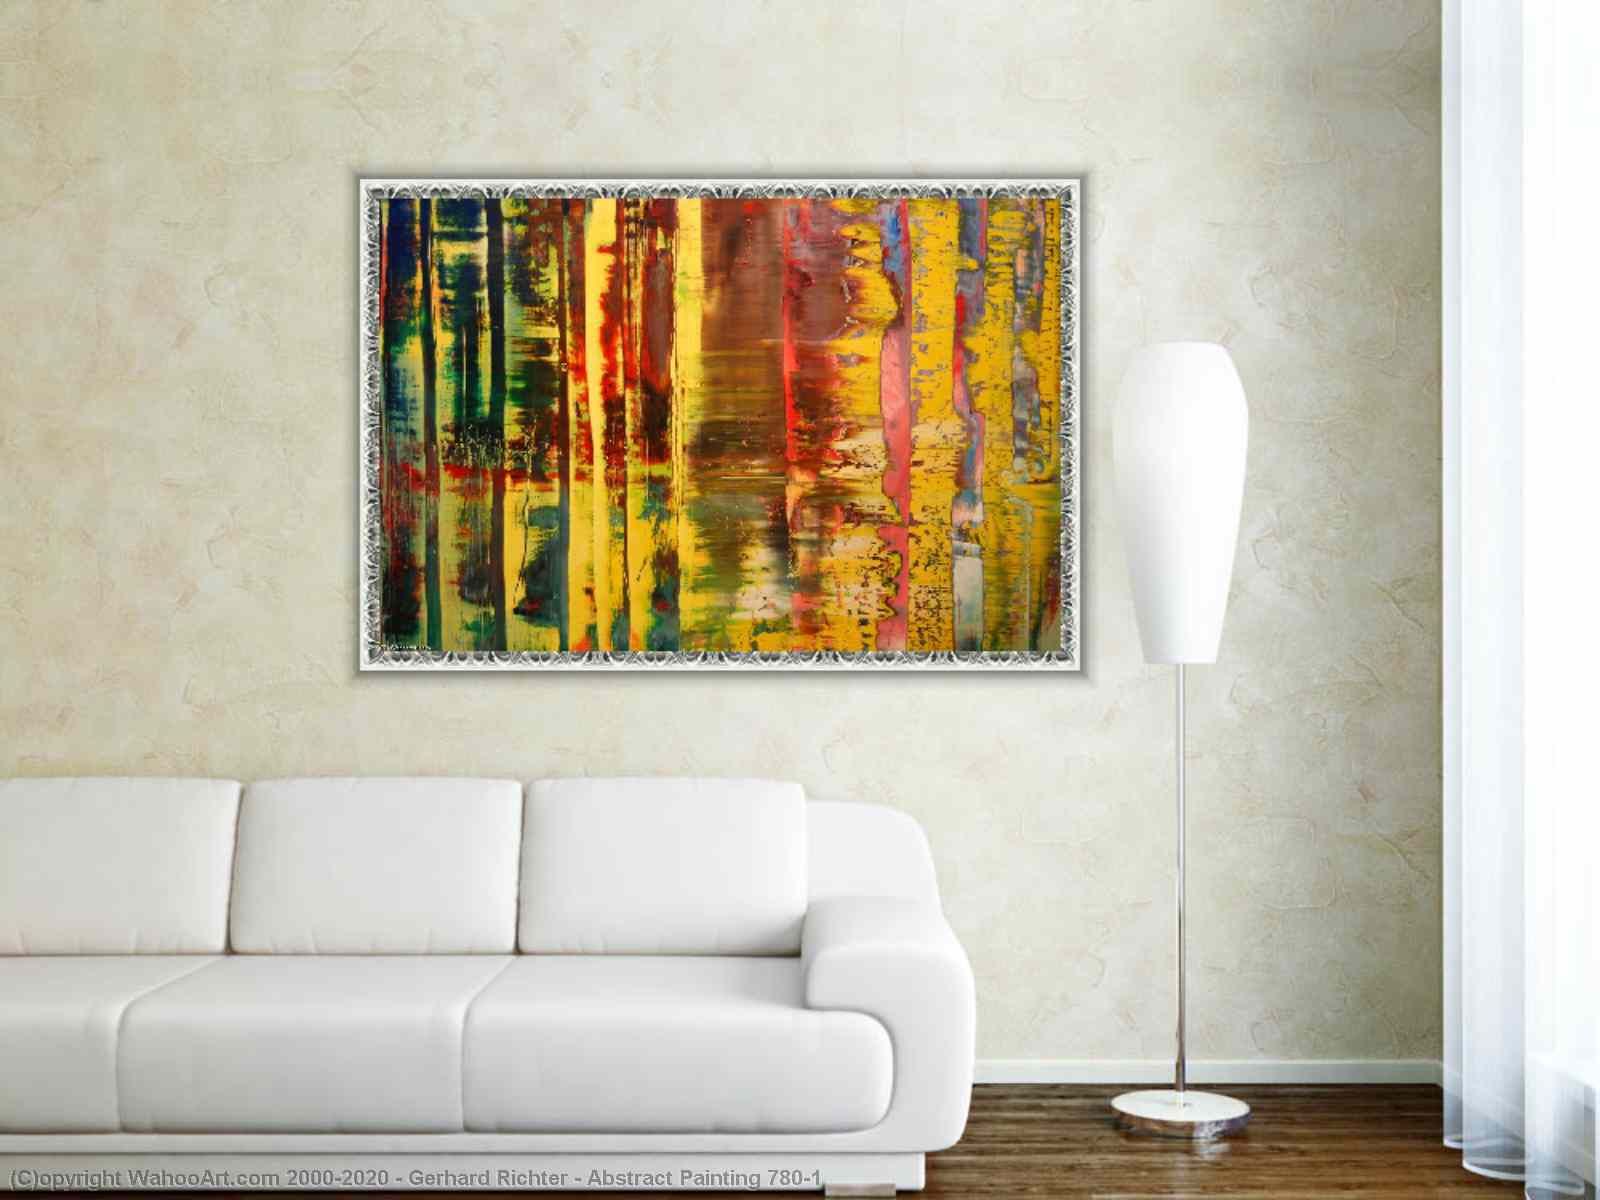 Abstract Painting 780 1 Abstract Painting 780-1 by Gerhard Richter | Art Reproductions Pop Art |  BuyPopArt.com